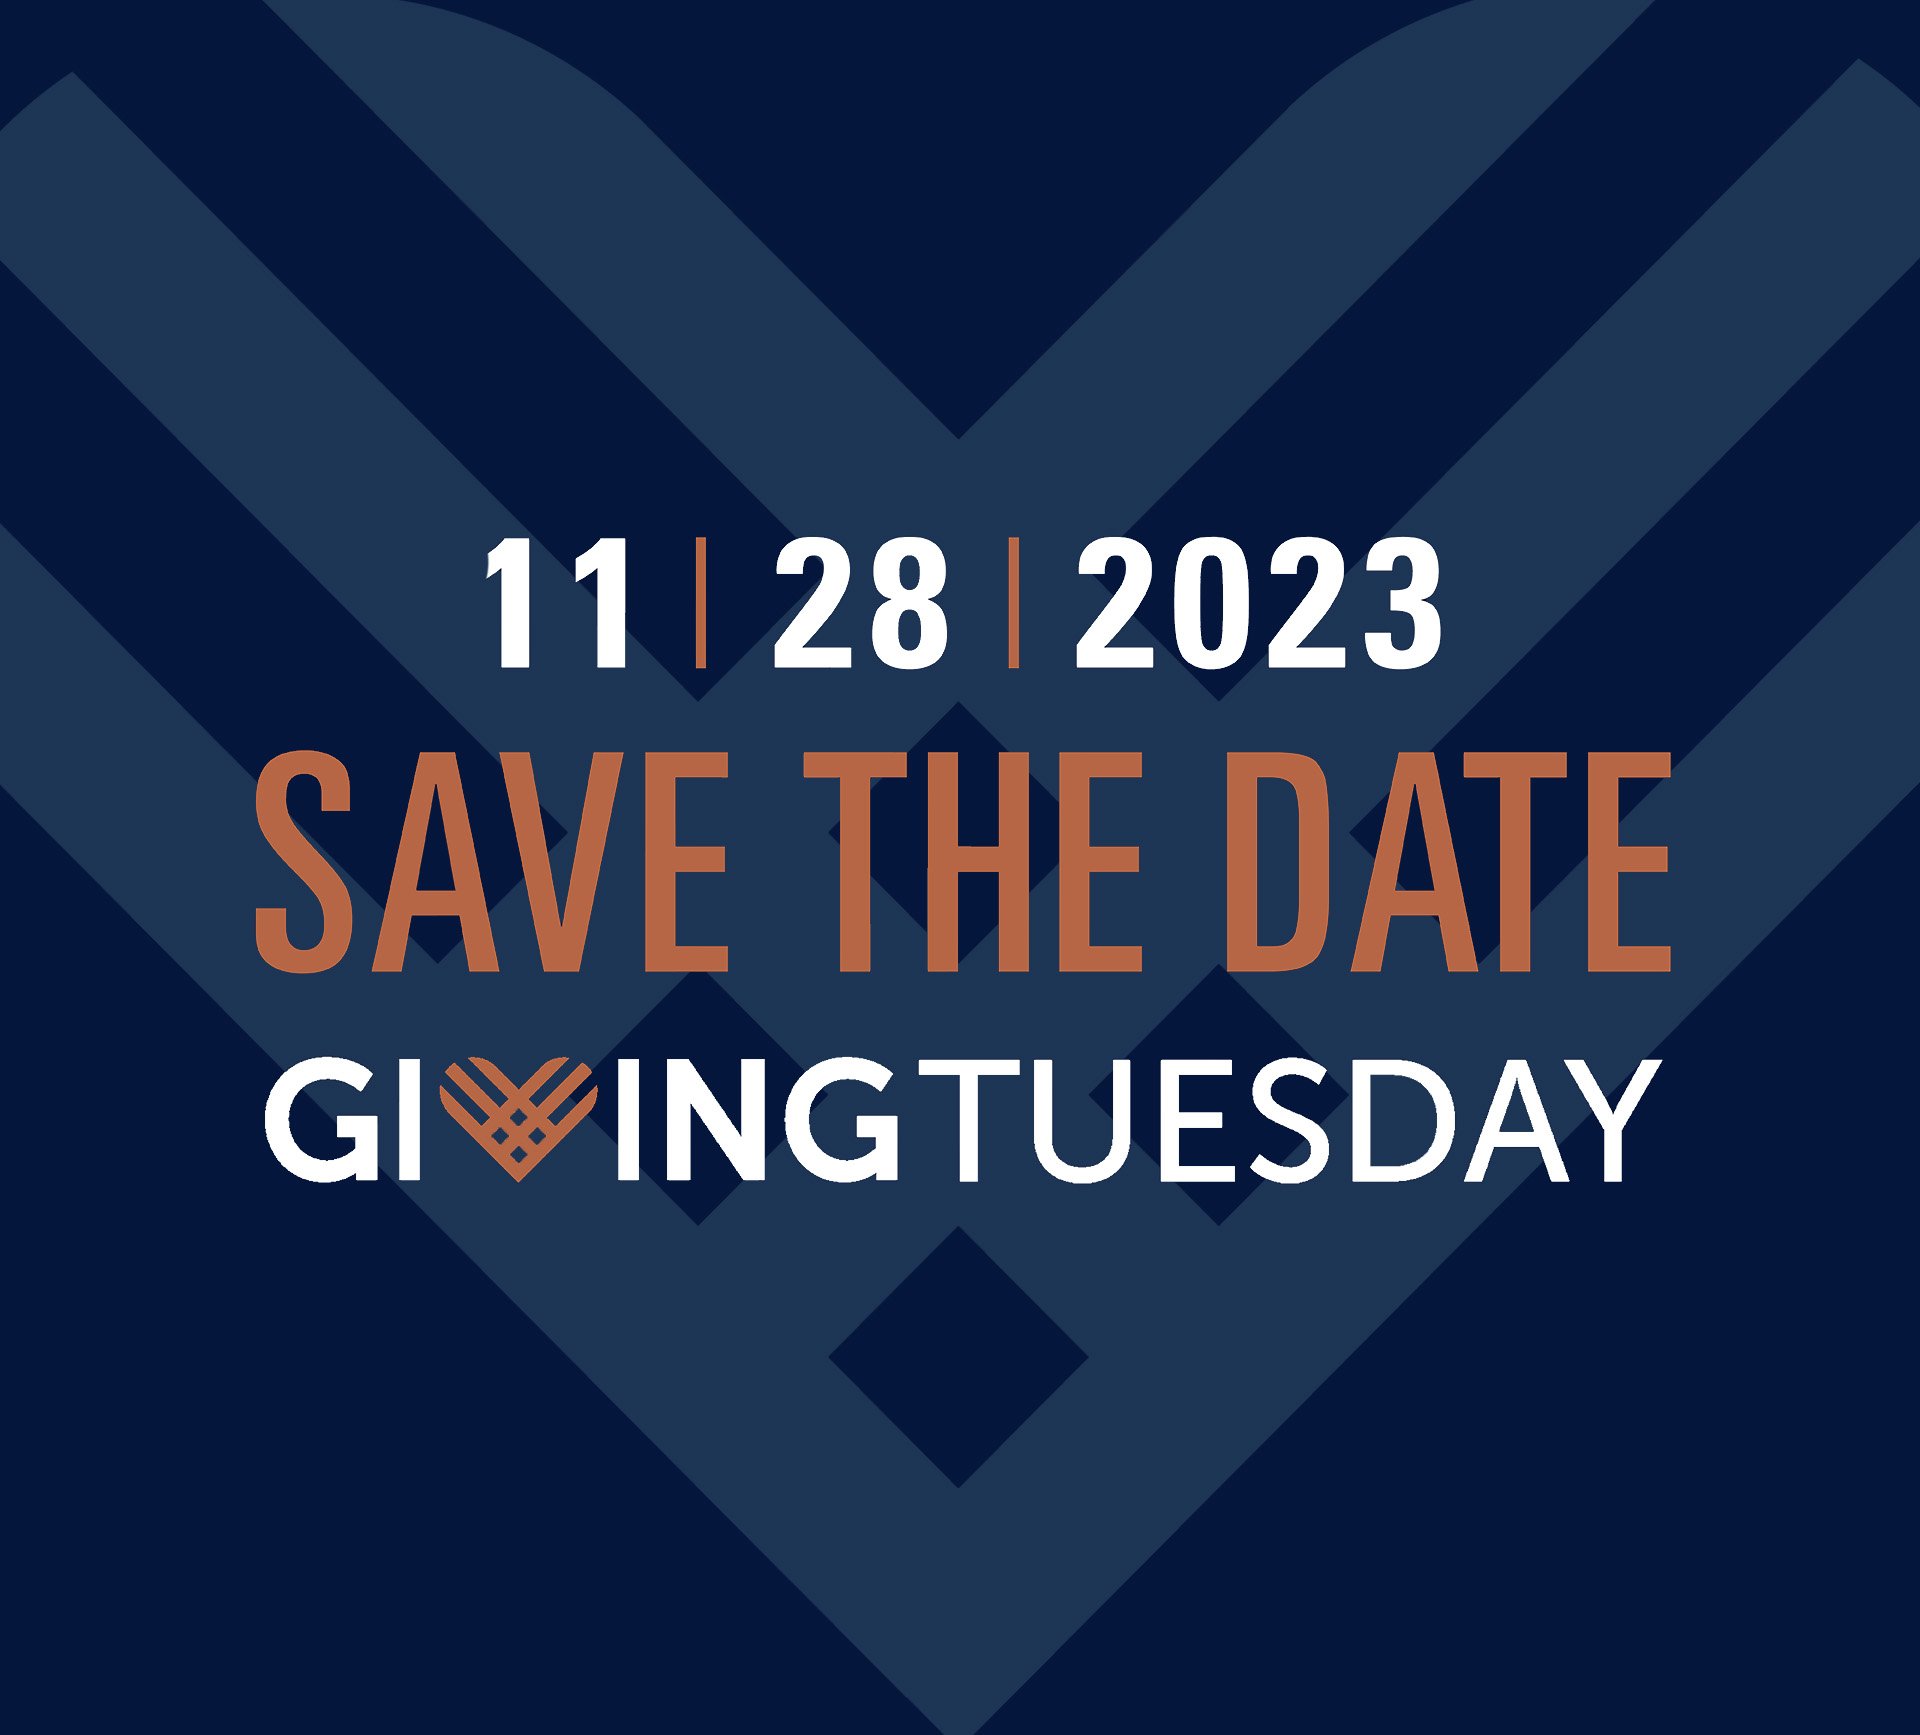 Save the date graphic for Giving Tuesday on Nov. 28, 2023.